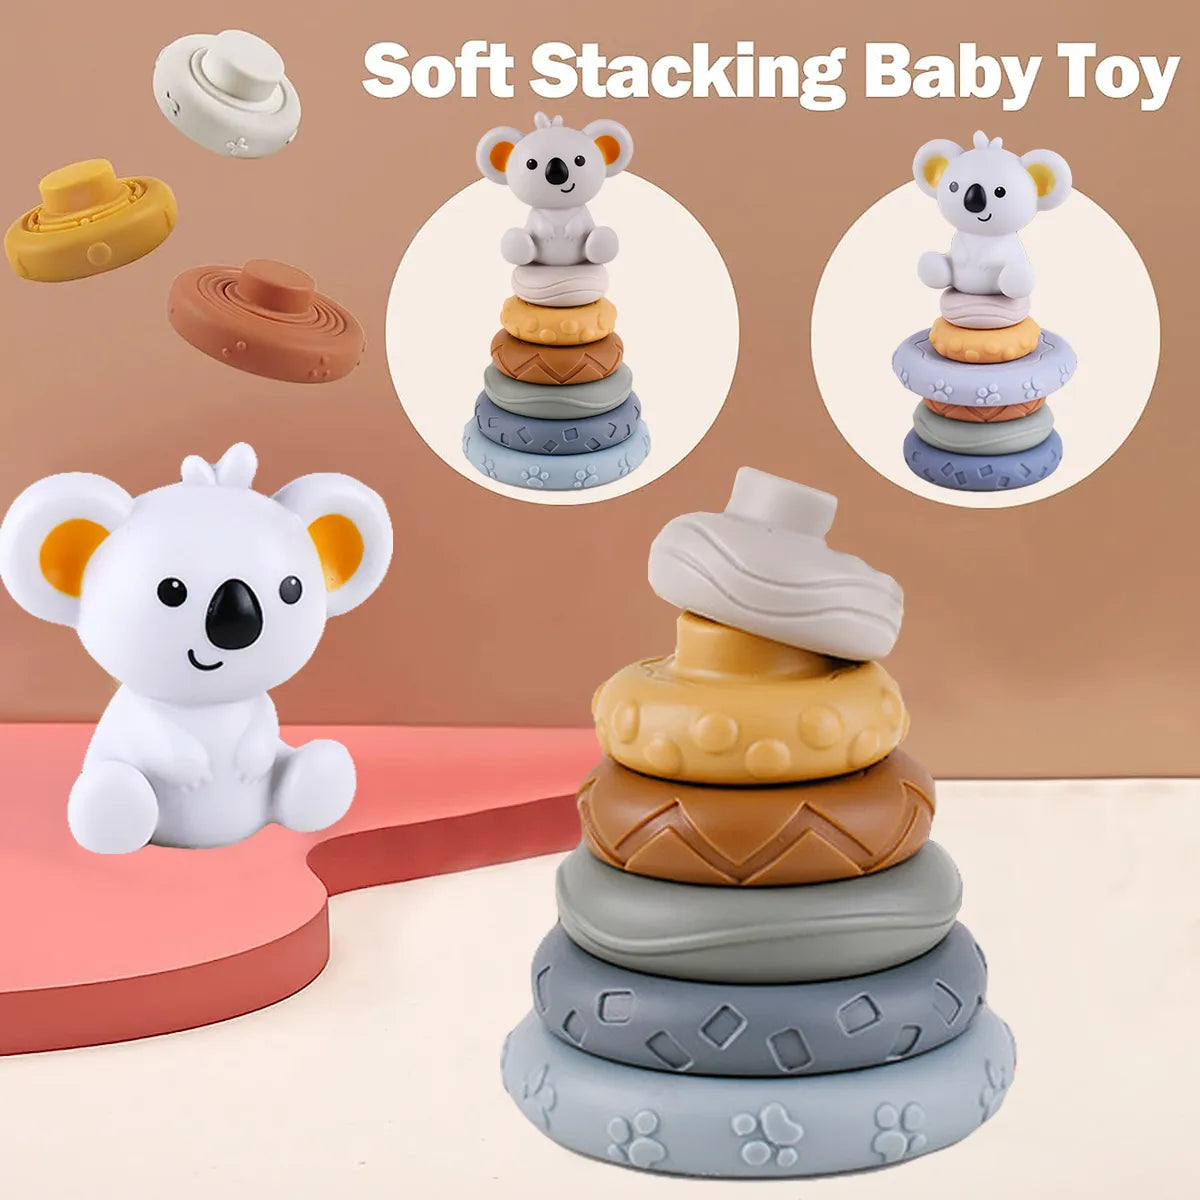 Silicone building blocks for babies, stacker, teething and learning toy